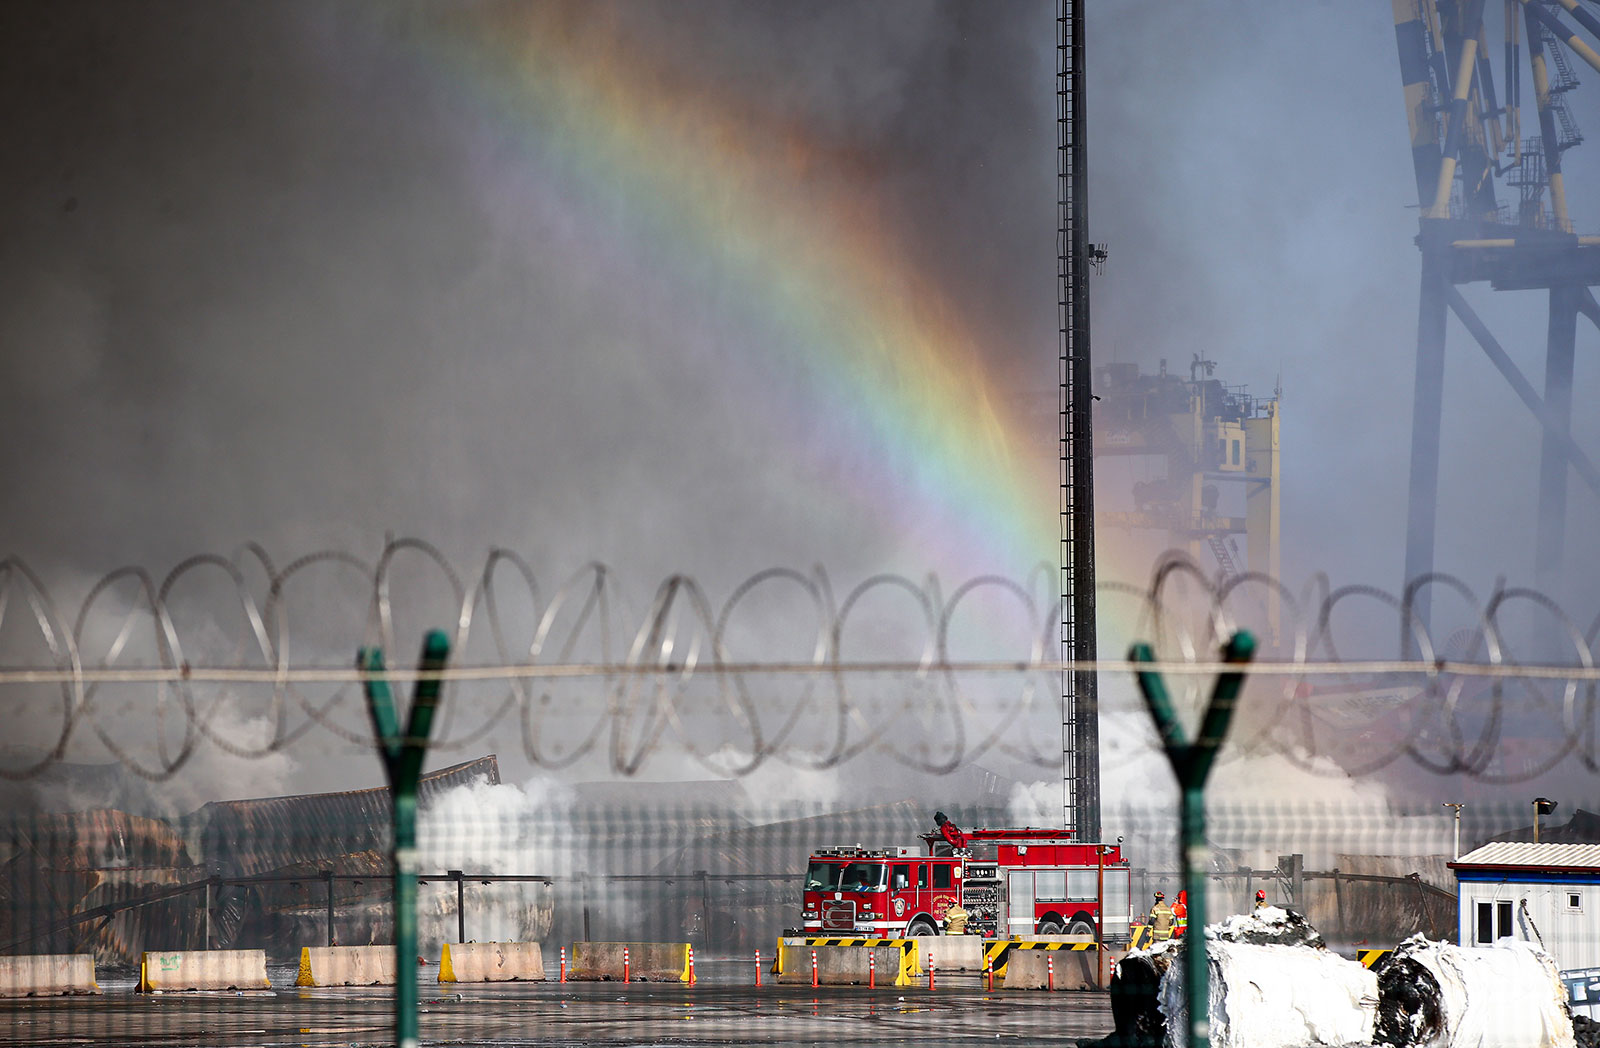 A rainbow appears as firetrucks work to extinguish a major fire that broke out at the Iskenderun port.